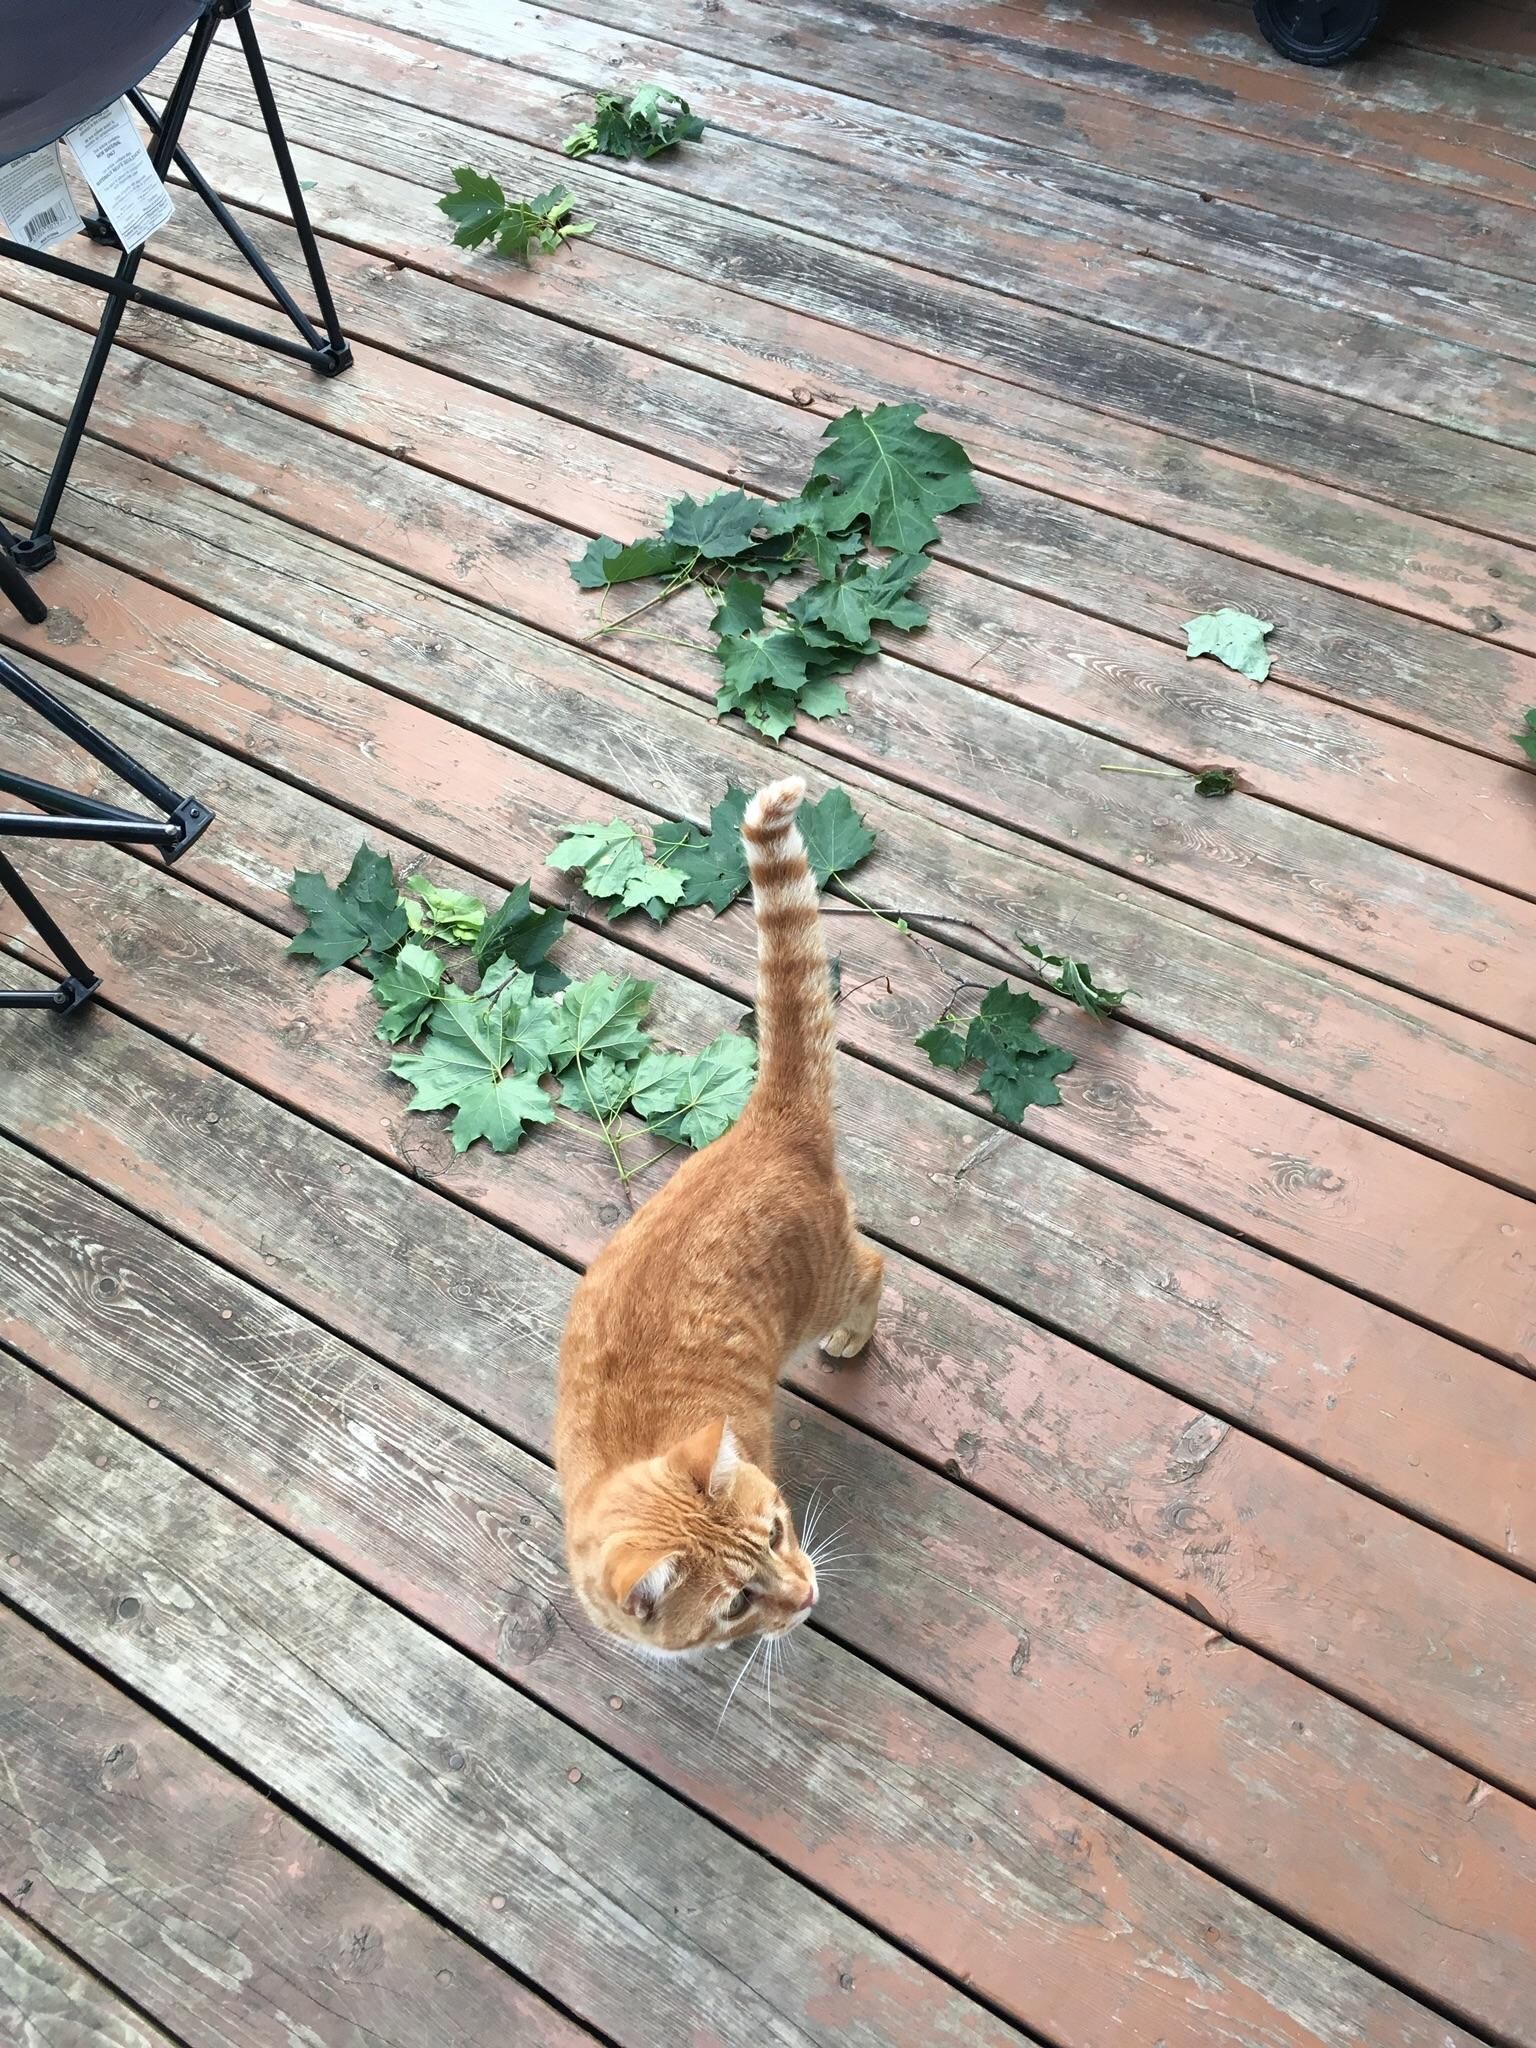 Beginning earlier this summer my cat began bringing us maple leaf twigs. I have no insight as to why. Lately oak leaf twigs have also made an appearance.